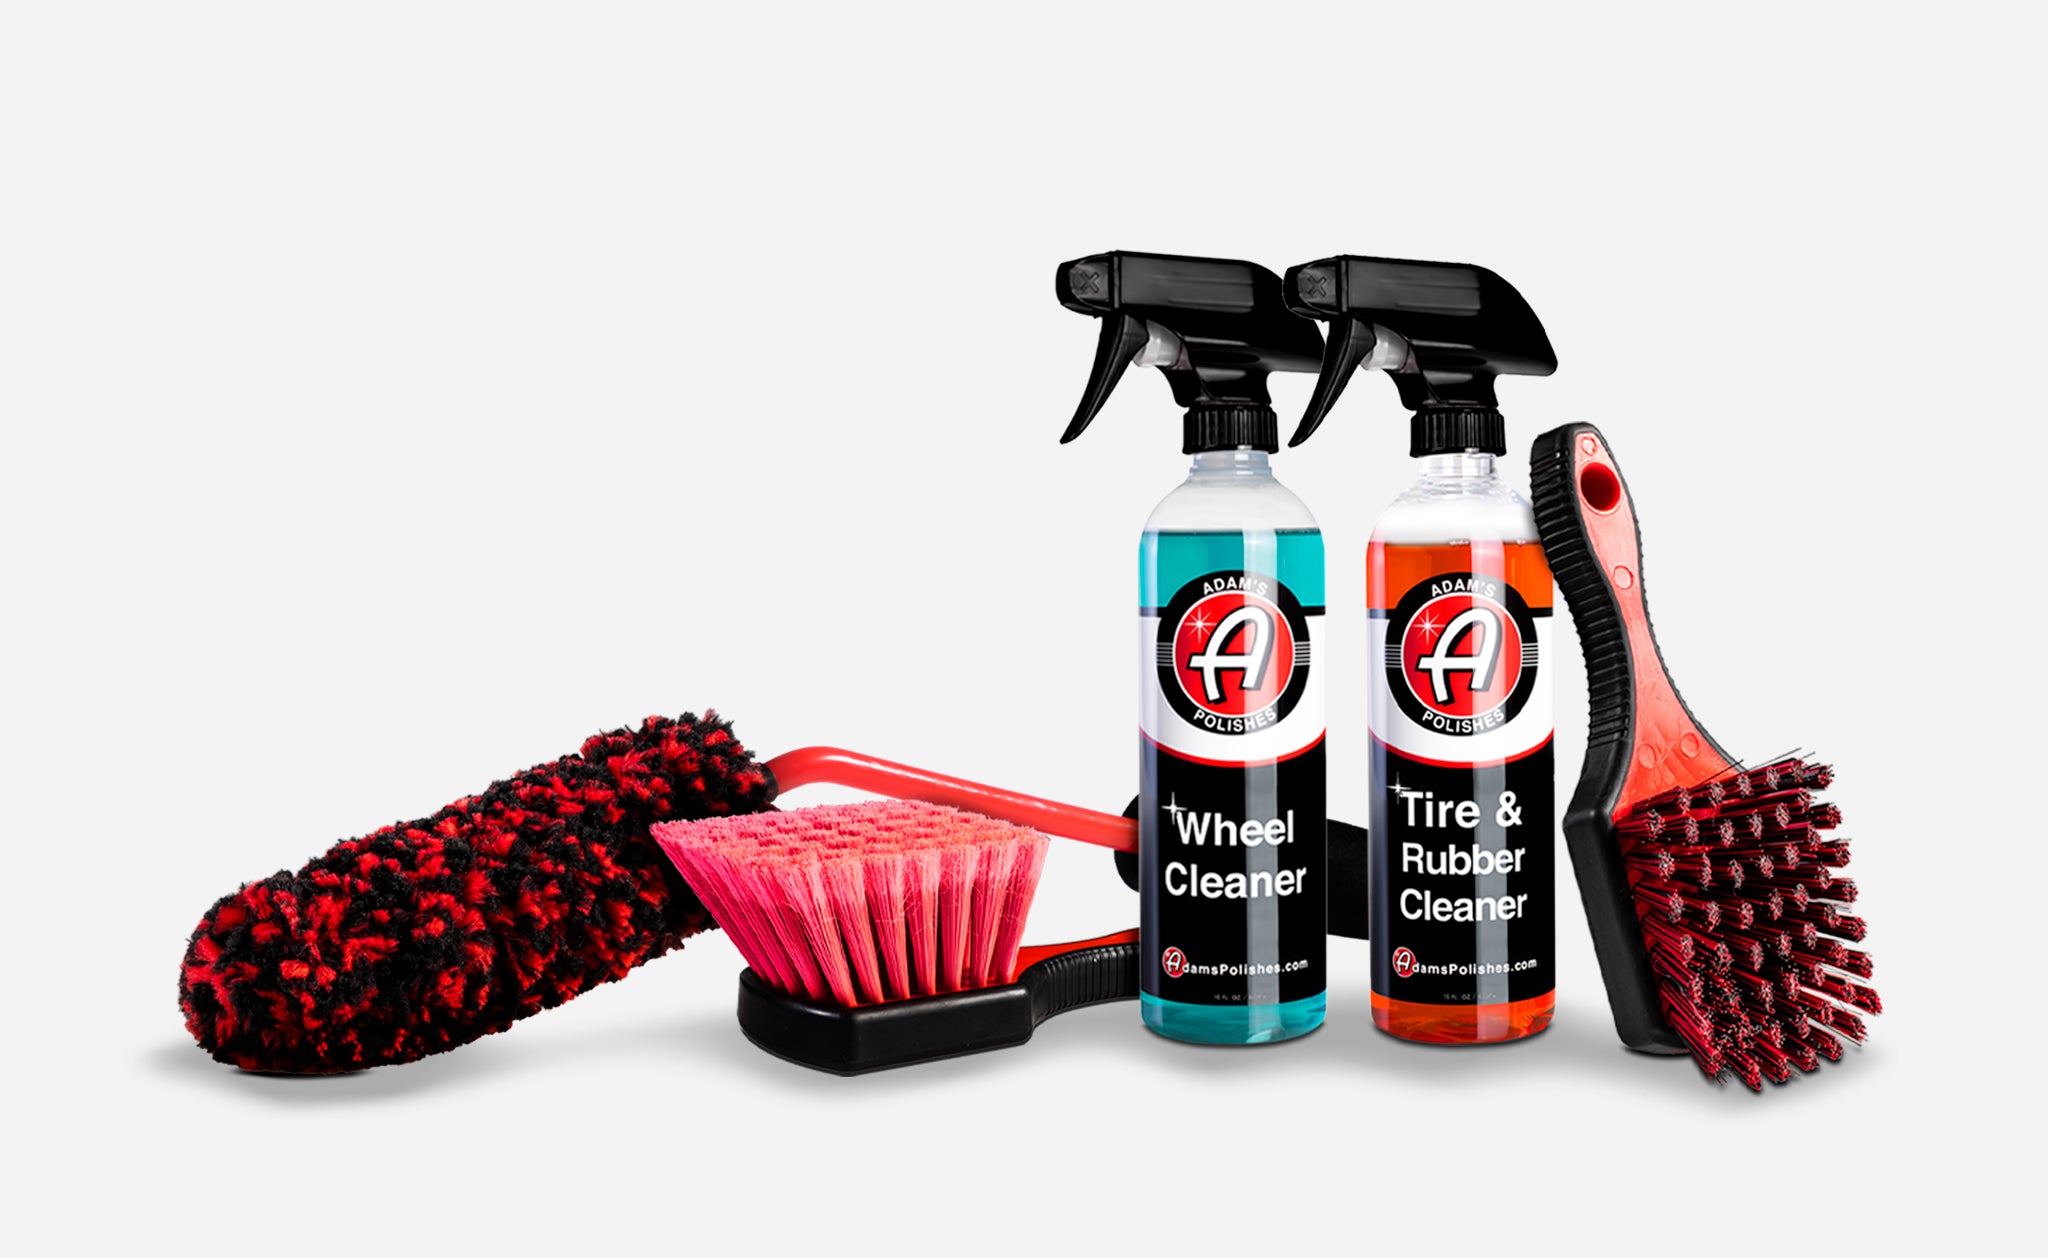 Rev Auto Wheel Cleaning Kit (3 Items) - Professional Wheel Cleaning Kit Includes Wheel Cleaner, Wheel Brush, and Tire Brush/Car Rim Cleaner Kit That